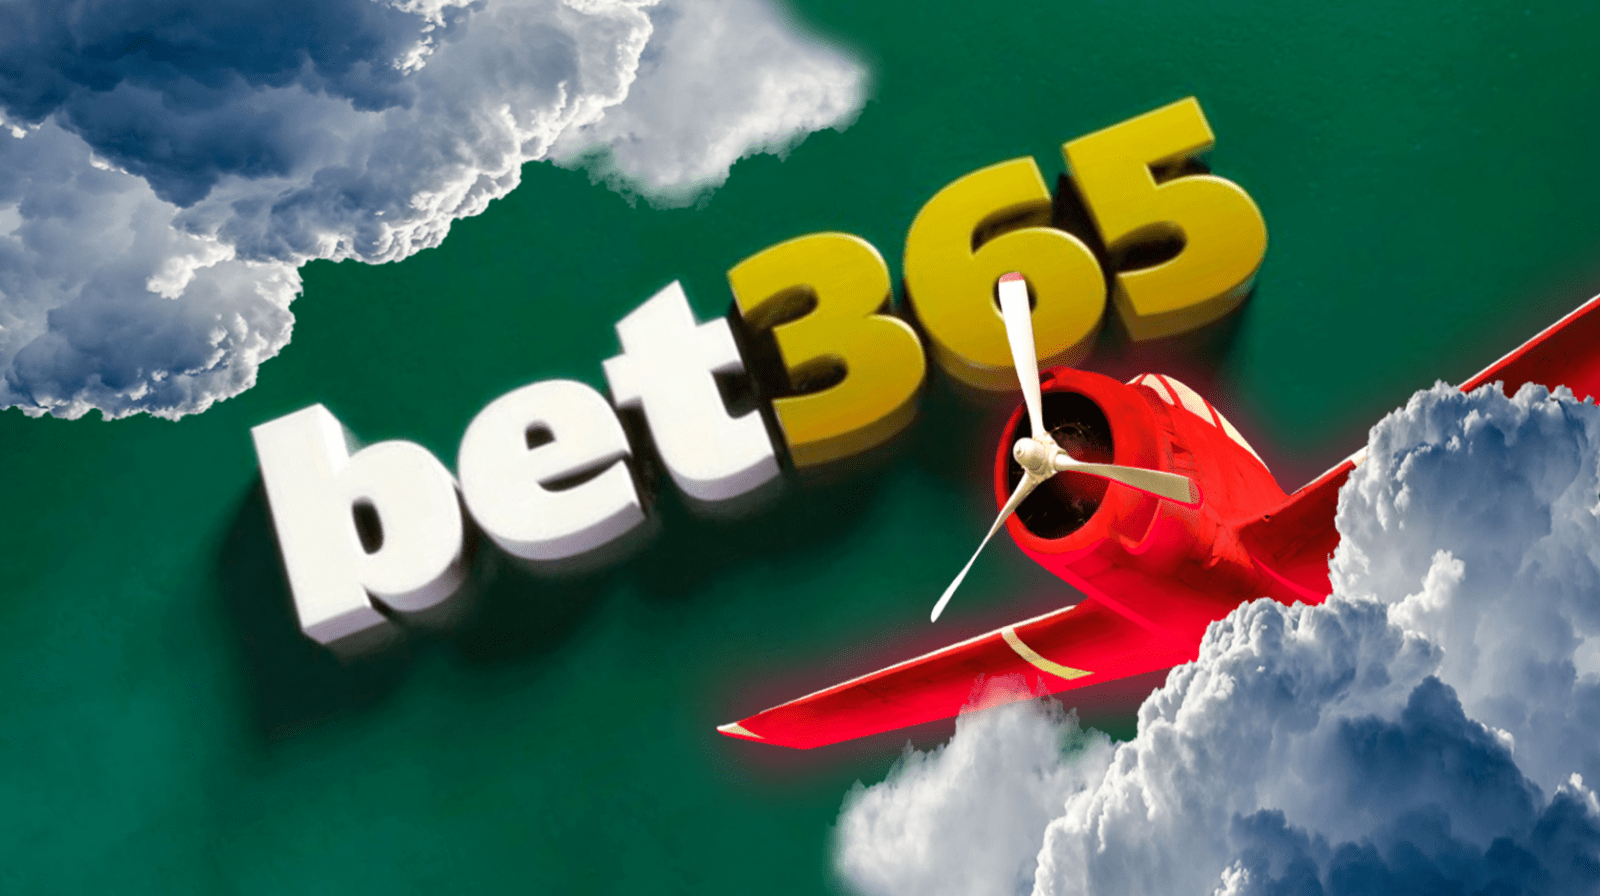 Bet365 Aviator Game: A Thrilling and Innovative Betting Experience